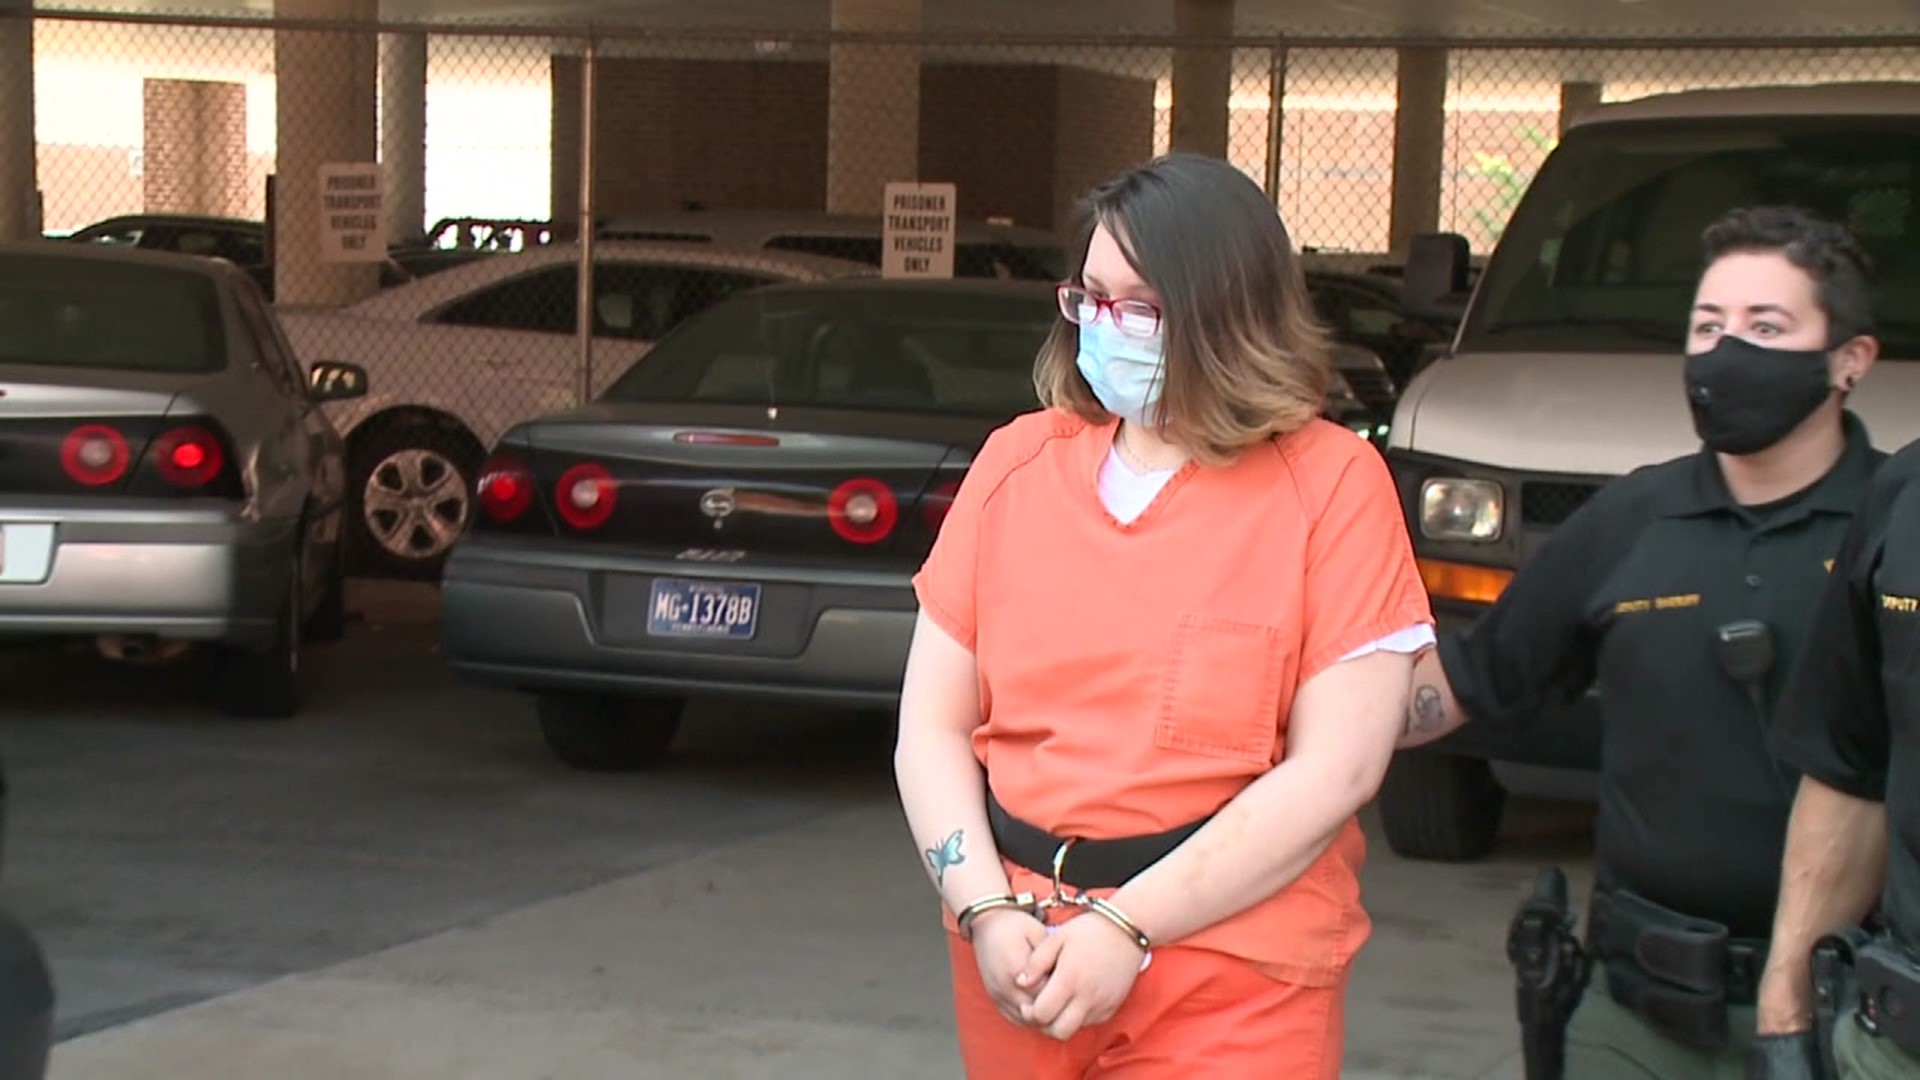 Gabriella Long was sentenced to 35 to 80 years in prison for her role in the robbery and murder of her grandfather.